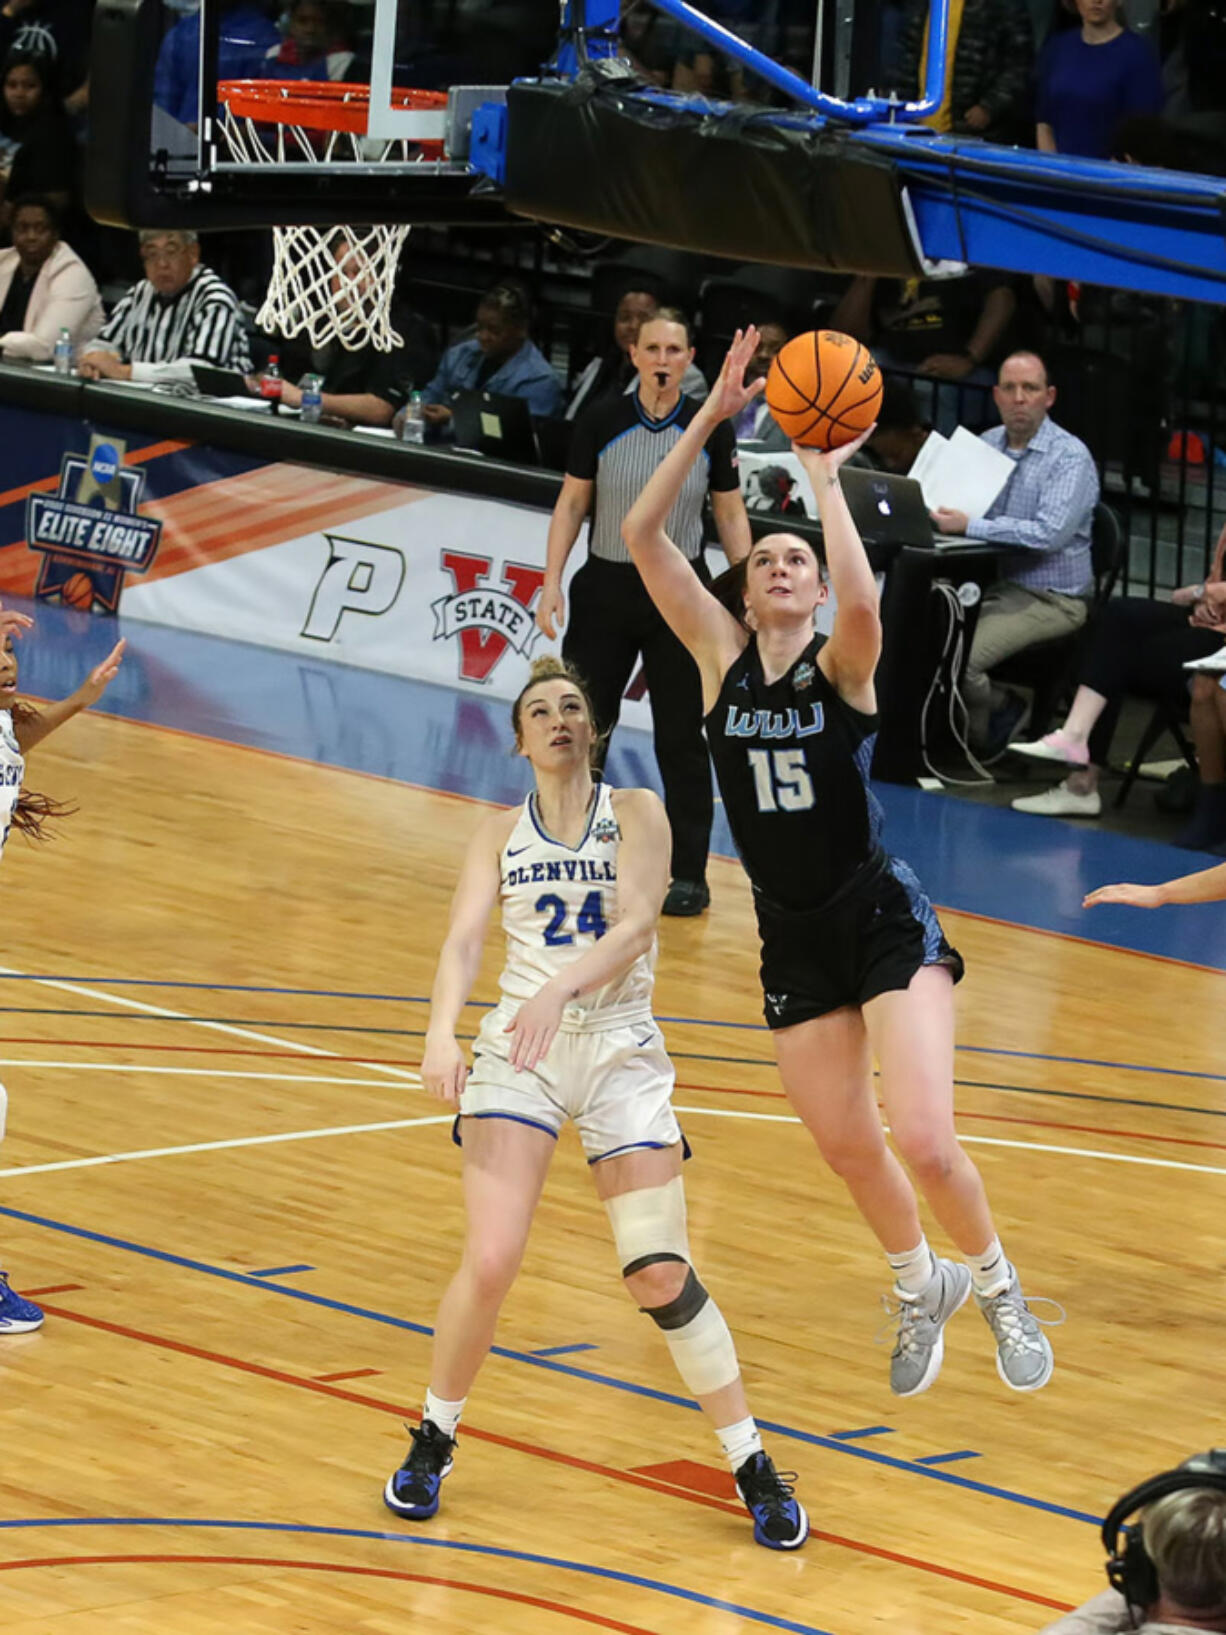 Western Washington?s Brooke Walling (15) goes past Glenville State?s Abby Stoller for two of her career-high 27 points during the NCAA Division II women?s championship game Friday at Birmingham, Ala.